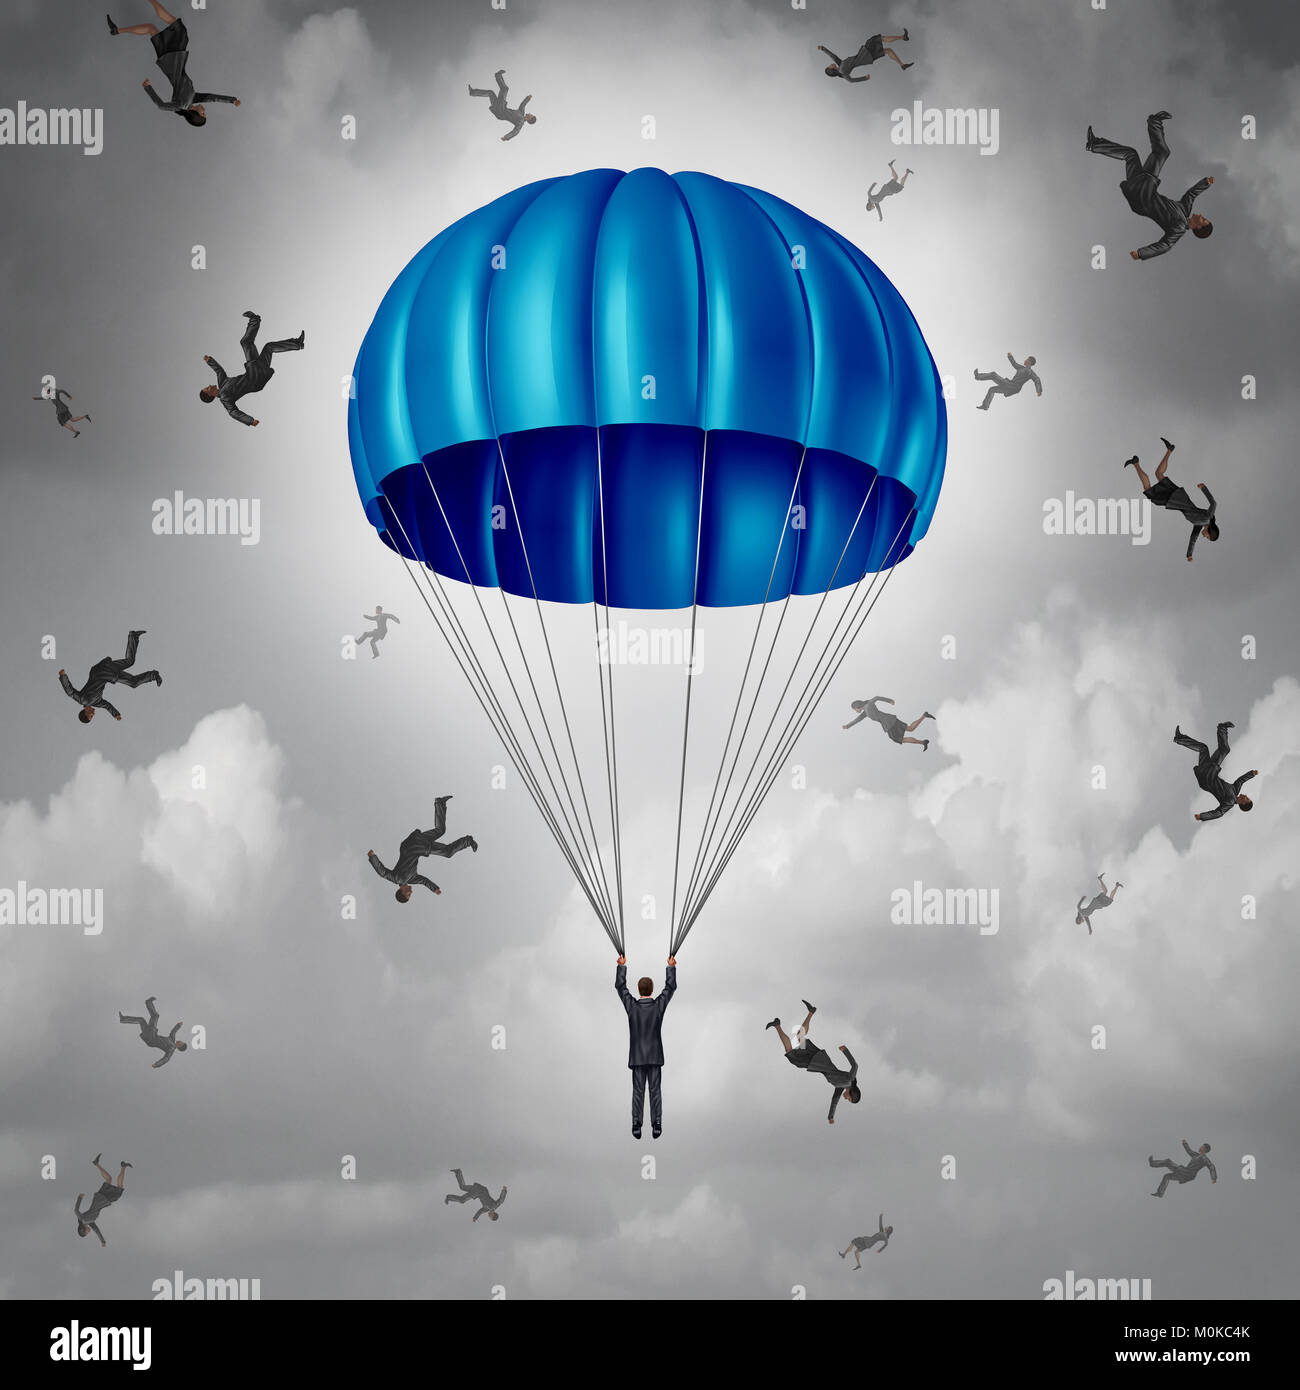 Corporate insurance and business protection concept as a businessman with a blue parachute being saved while others falling. Stock Photo